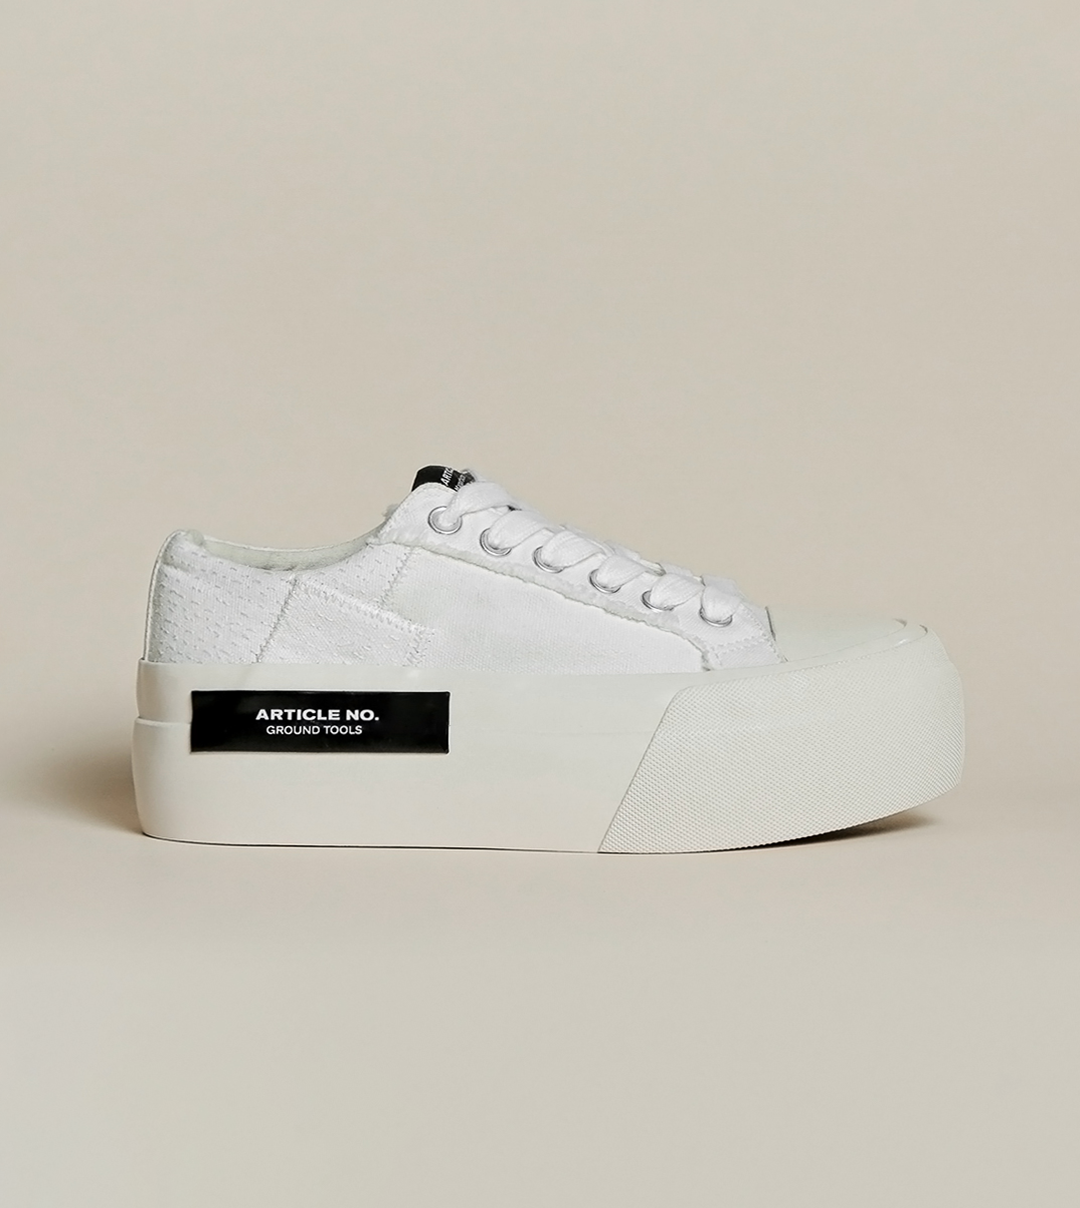 O.G. CLASSIC PATCHWORK PLATFORM WHITE SNEAKERS